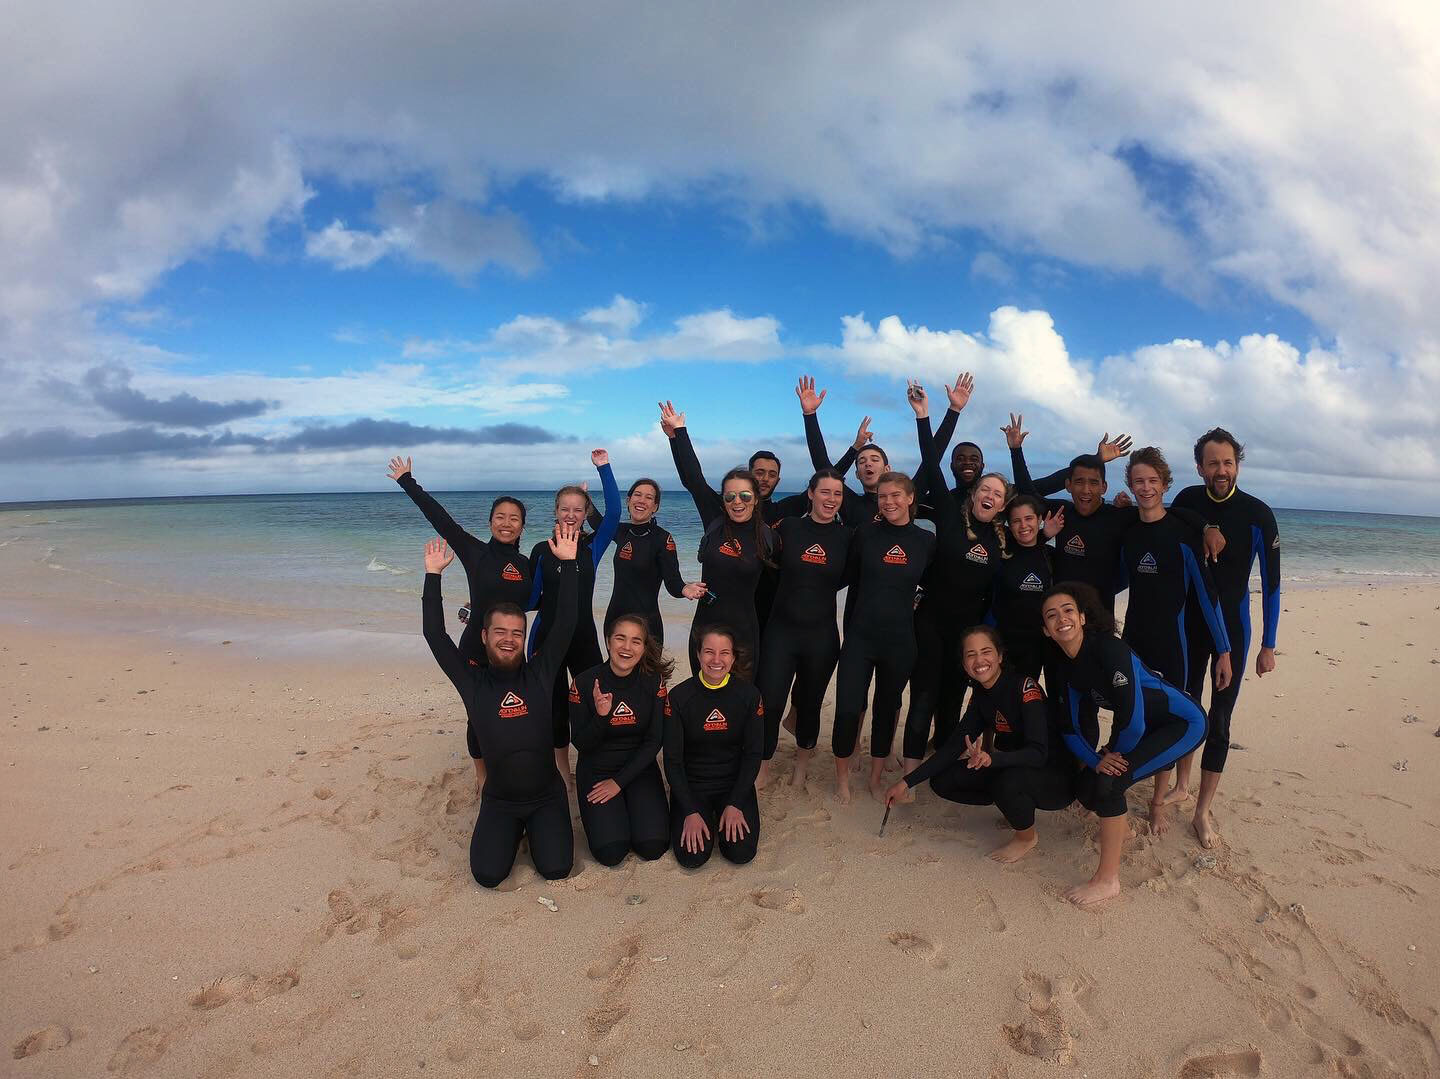 Group in wetsuits on beach